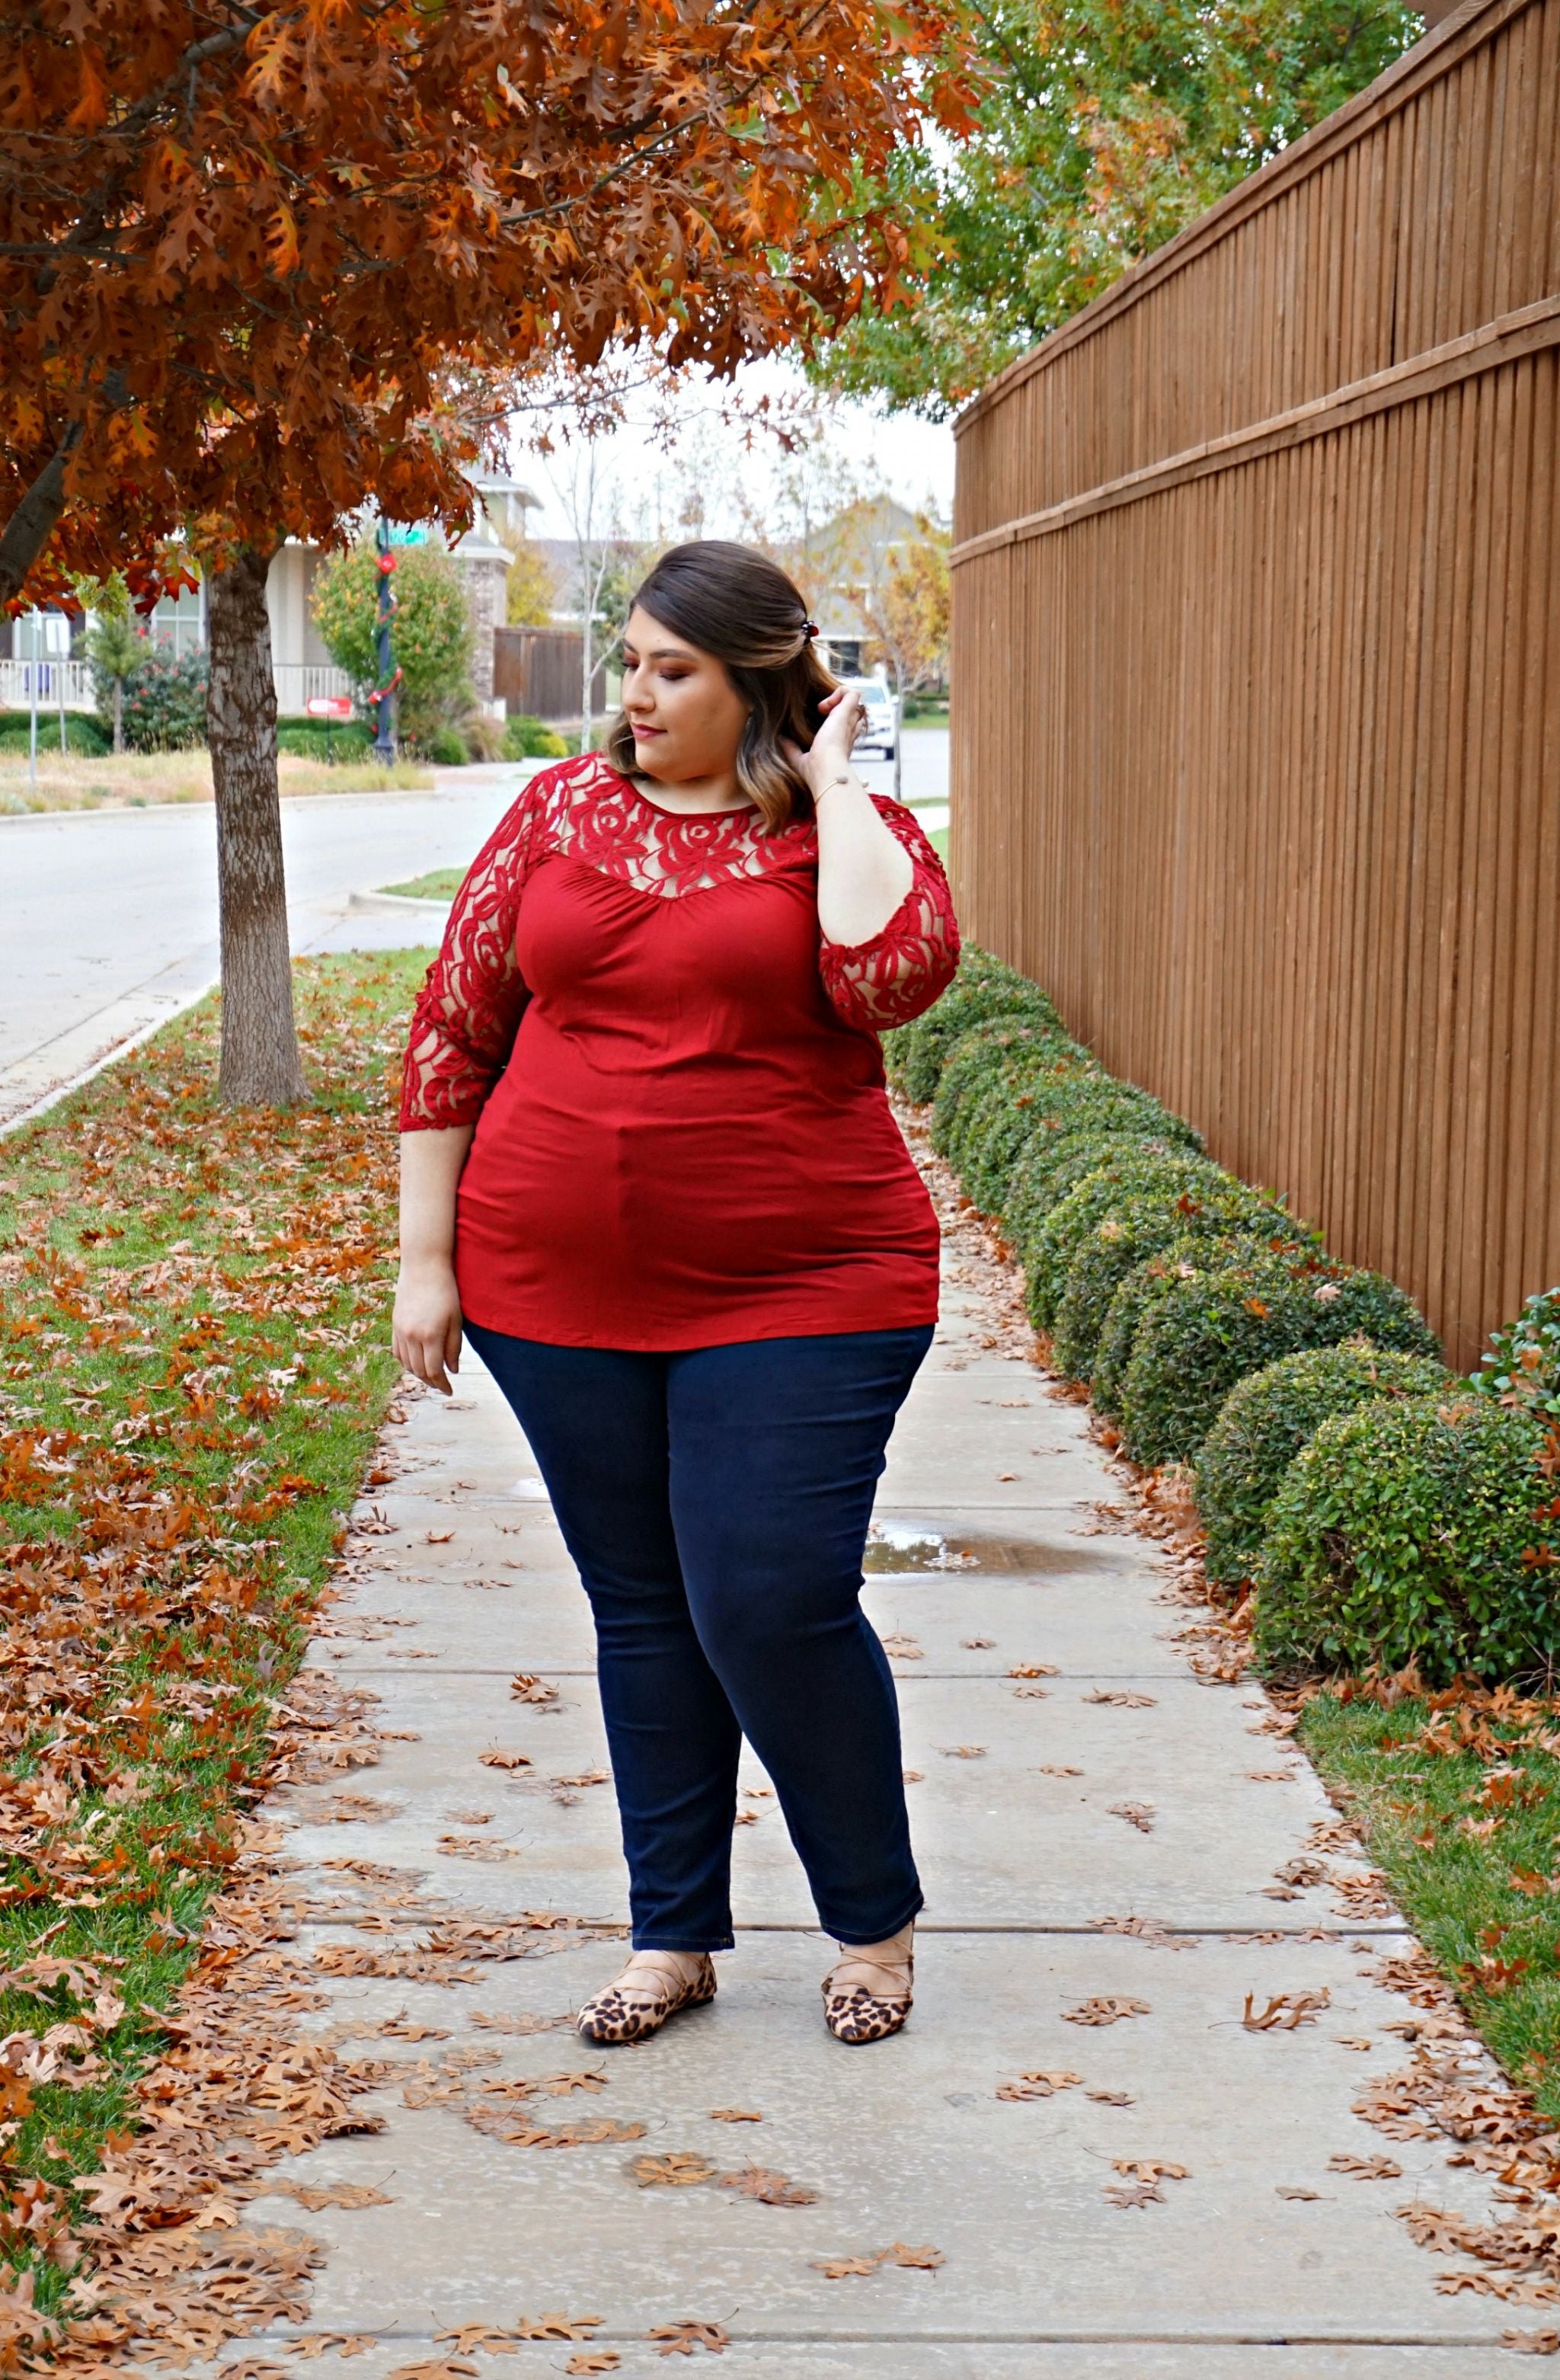 Are There Texas-inspired Plus-size Clothing Options?